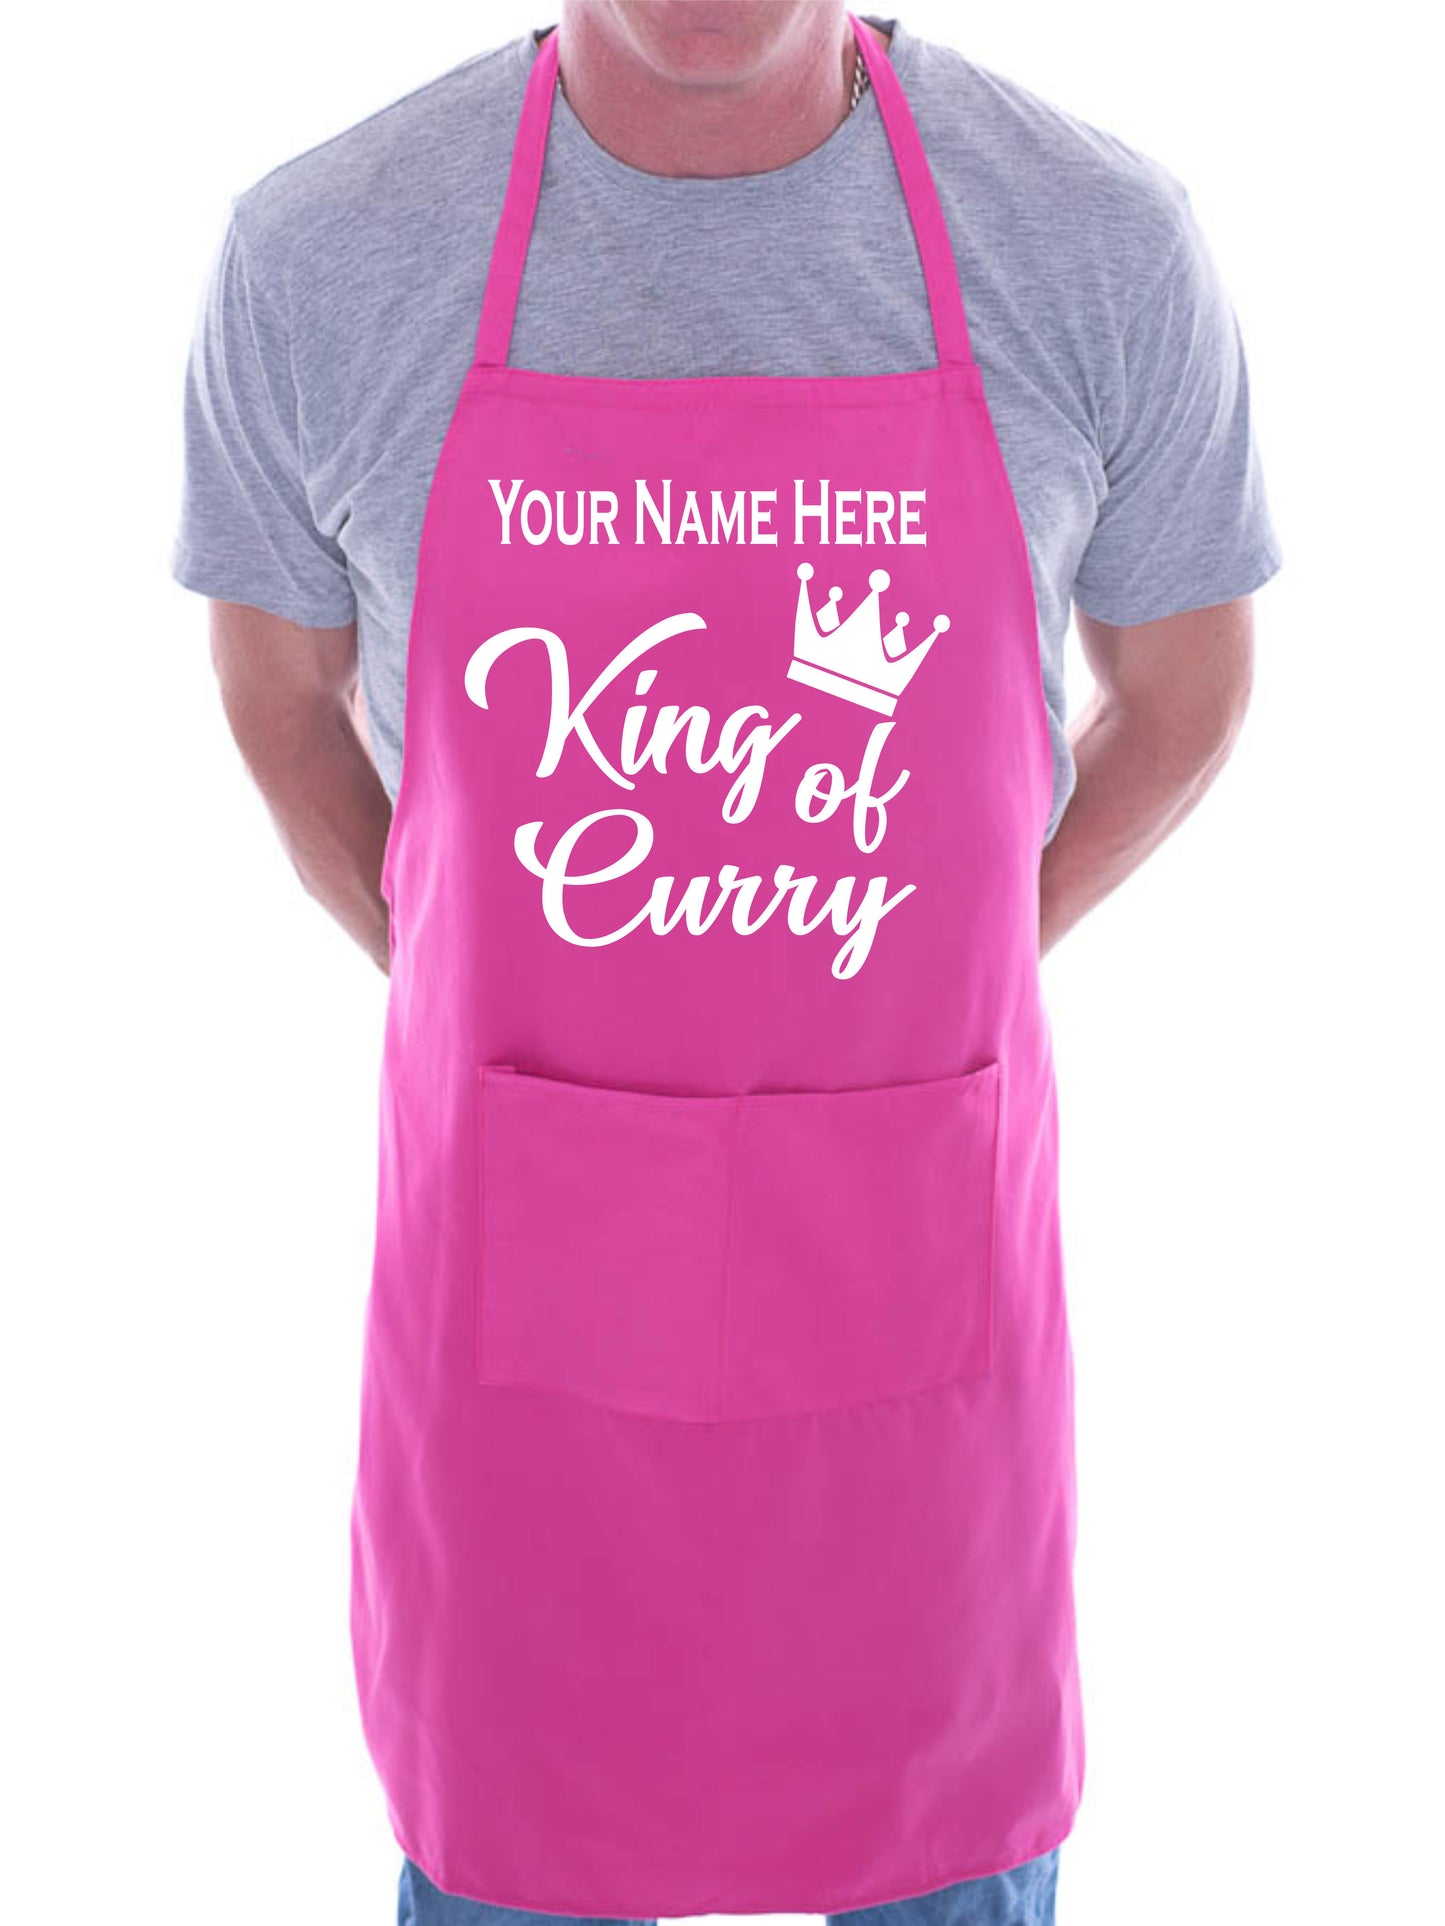 Personalise This Apron King Of Curry Any Name Here BBQ Cooking Apron